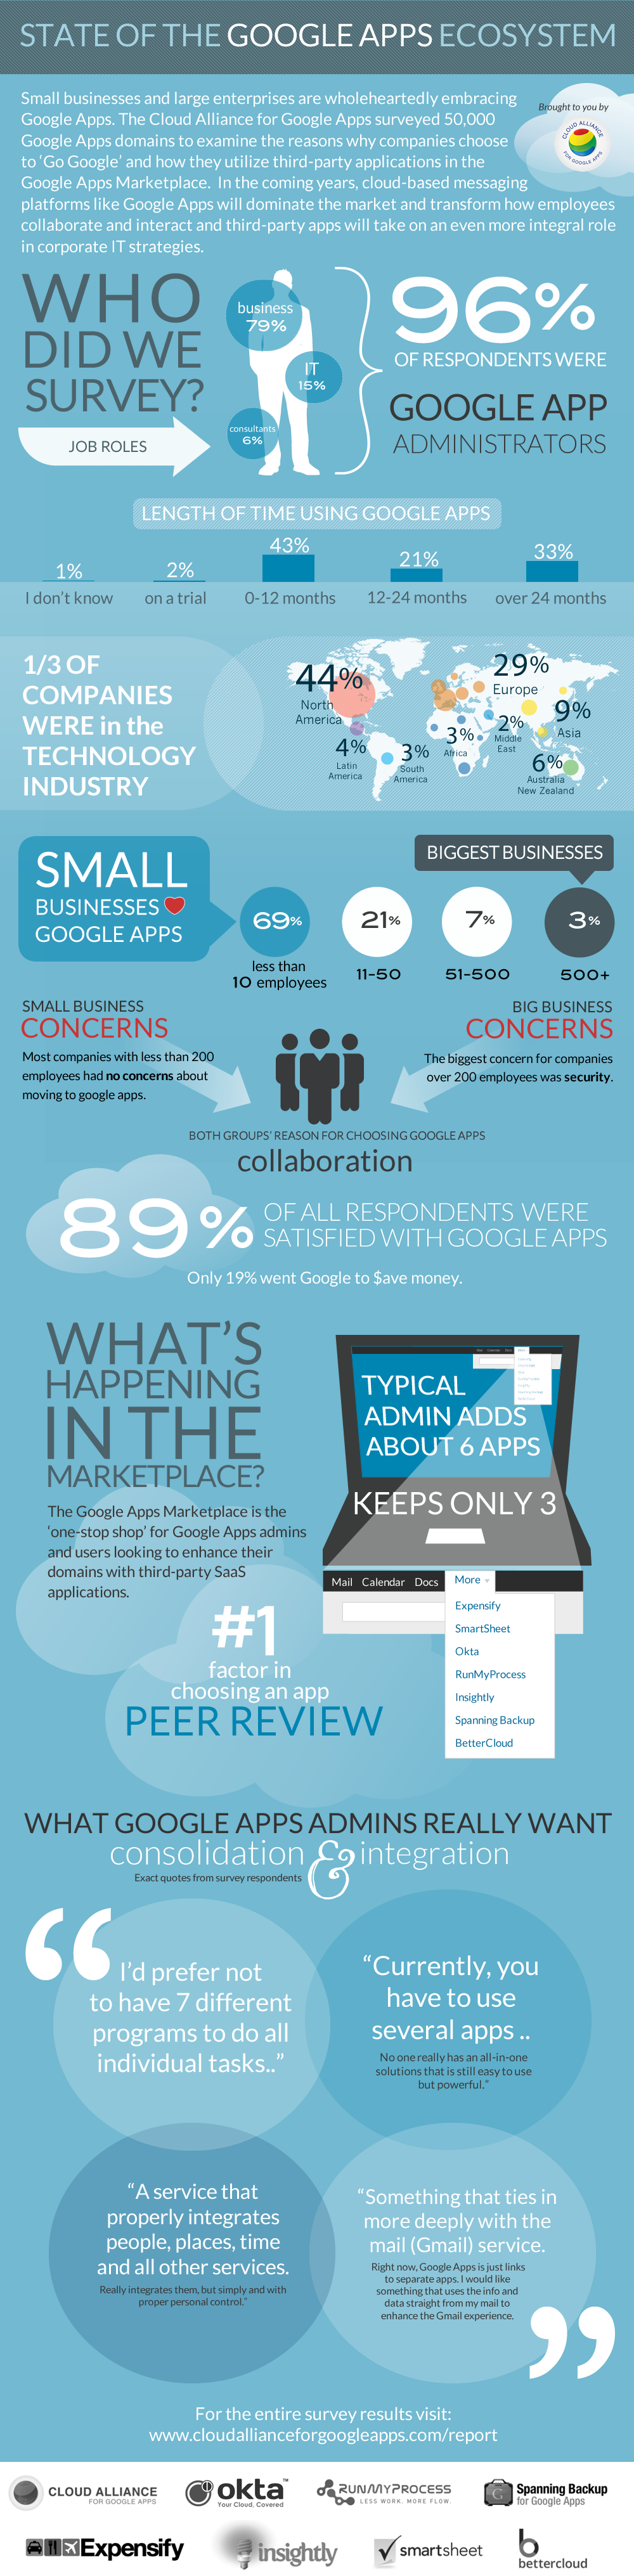 The State of the Google Apps Ecosystem